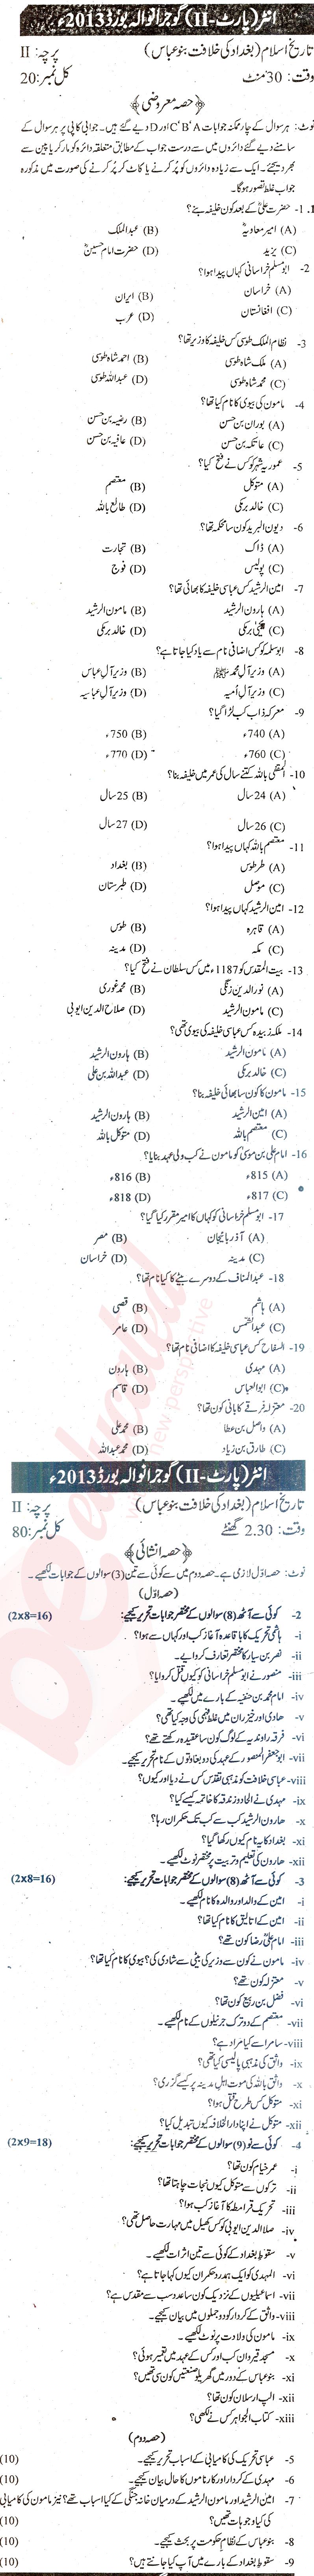 Islamic History FA Part 2 Past Paper Group 1 BISE Gujranwala 2013